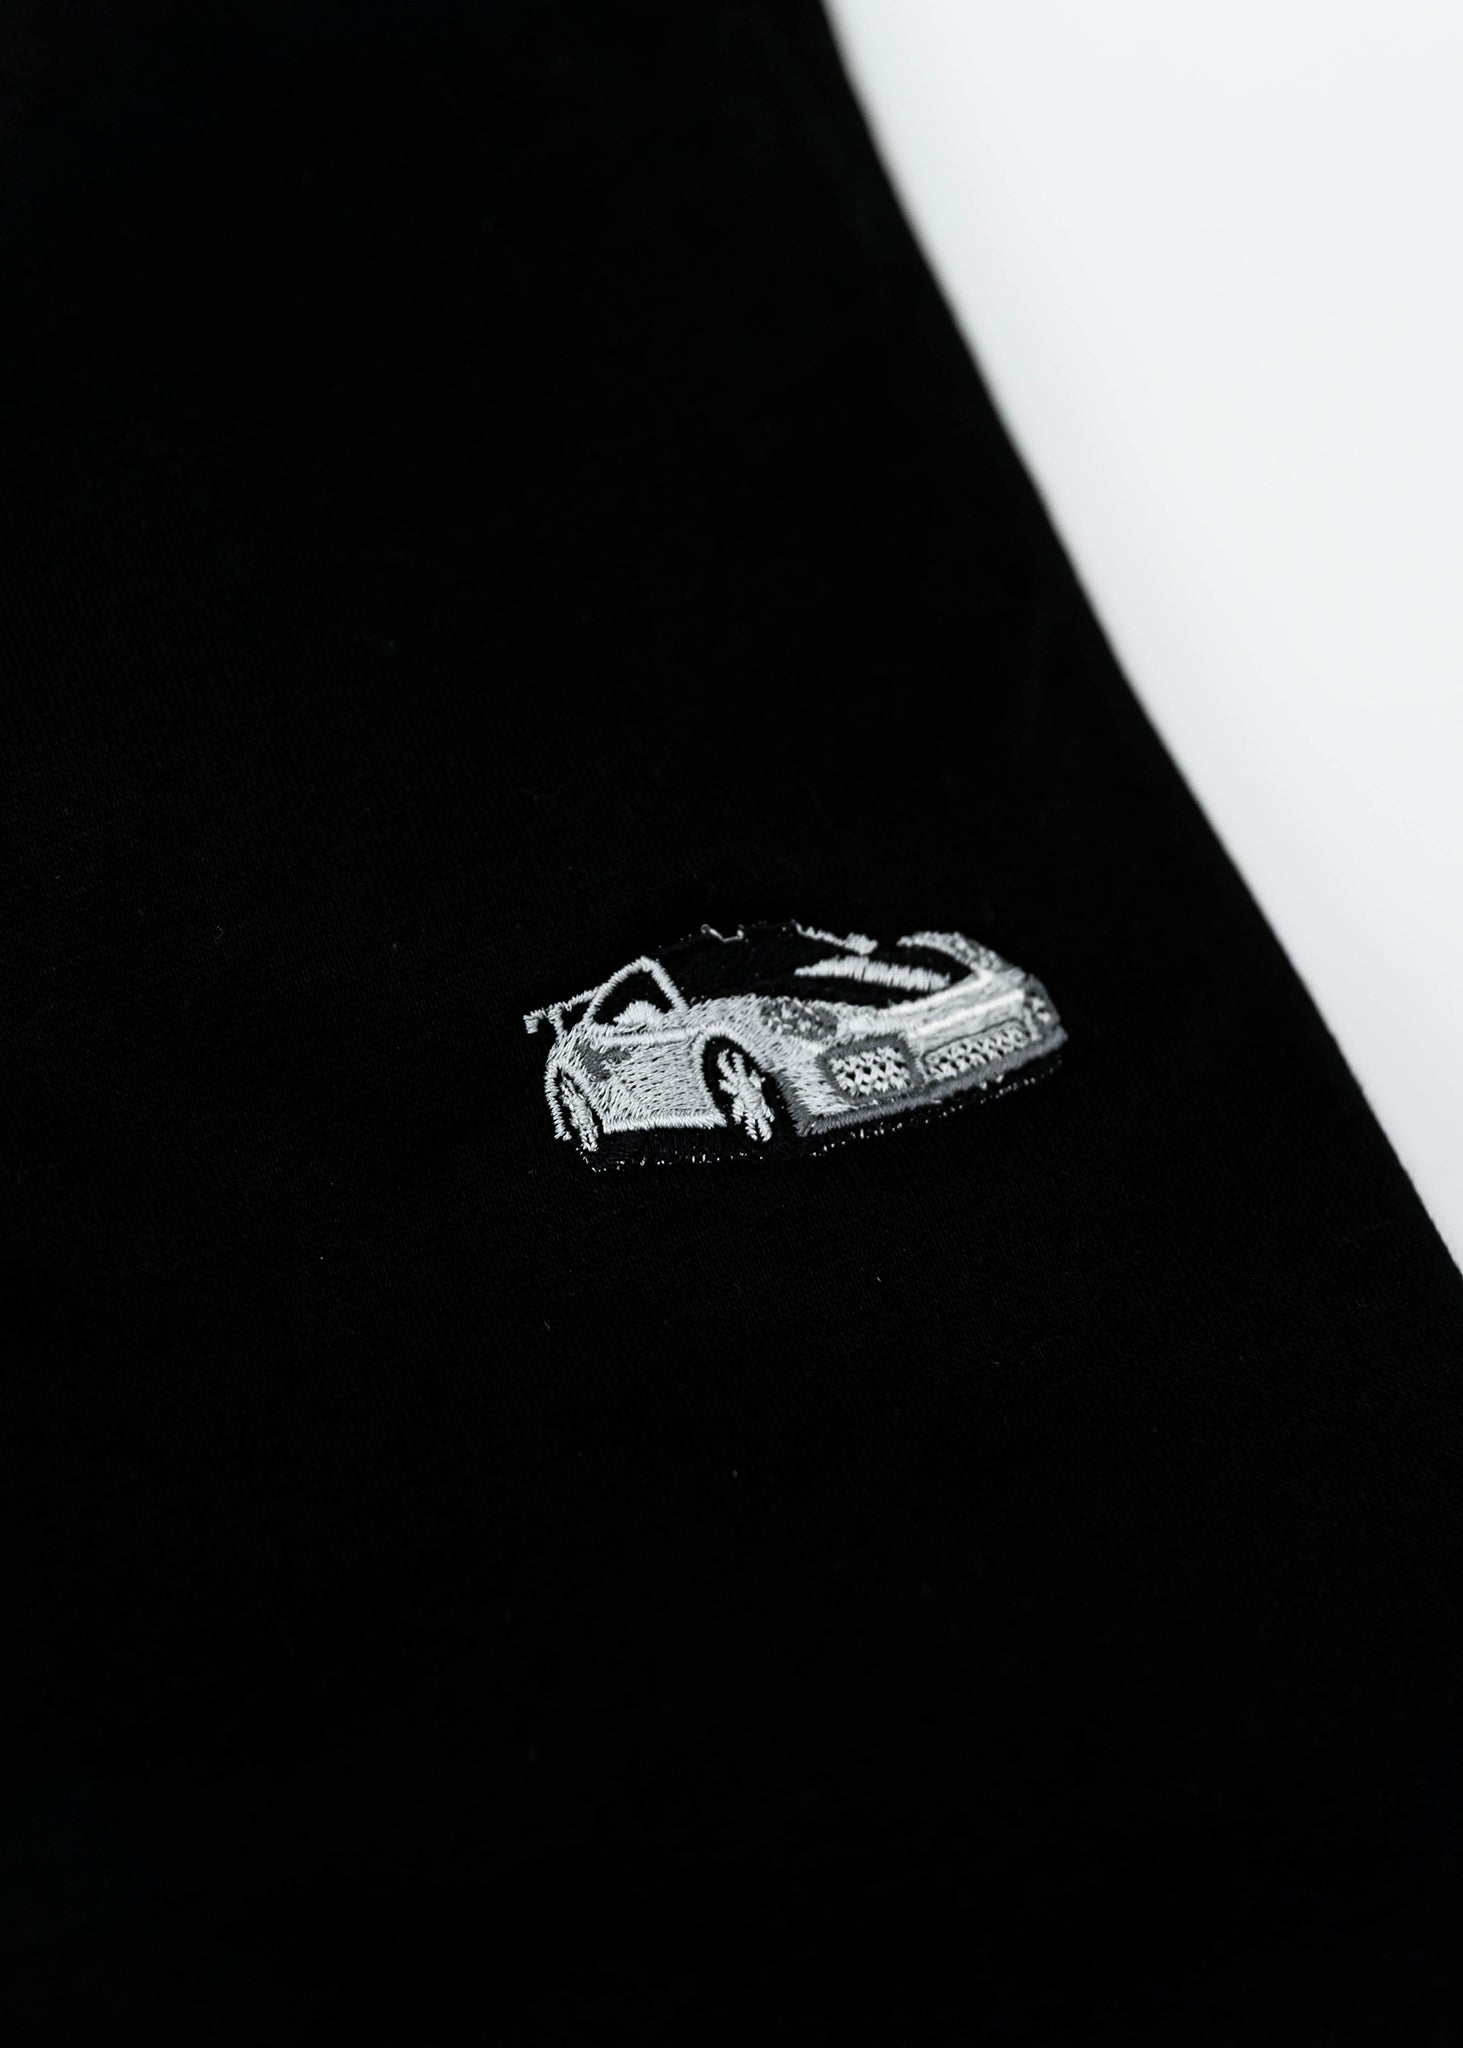 Close up of an embroidered 991.2 GT2 RS on a black men's high quality crewneck sweater. Photo shows the high quality detailed embroidery of a white, silver, and carbon fiber GT2 RS. Fabric composition of the shirt is cotton and polyester. The material is very soft, stretchy, and non-transparent. The style of this sweater is a crewneck, long sleeve, elastic bottom, with embroidery on the left chest.